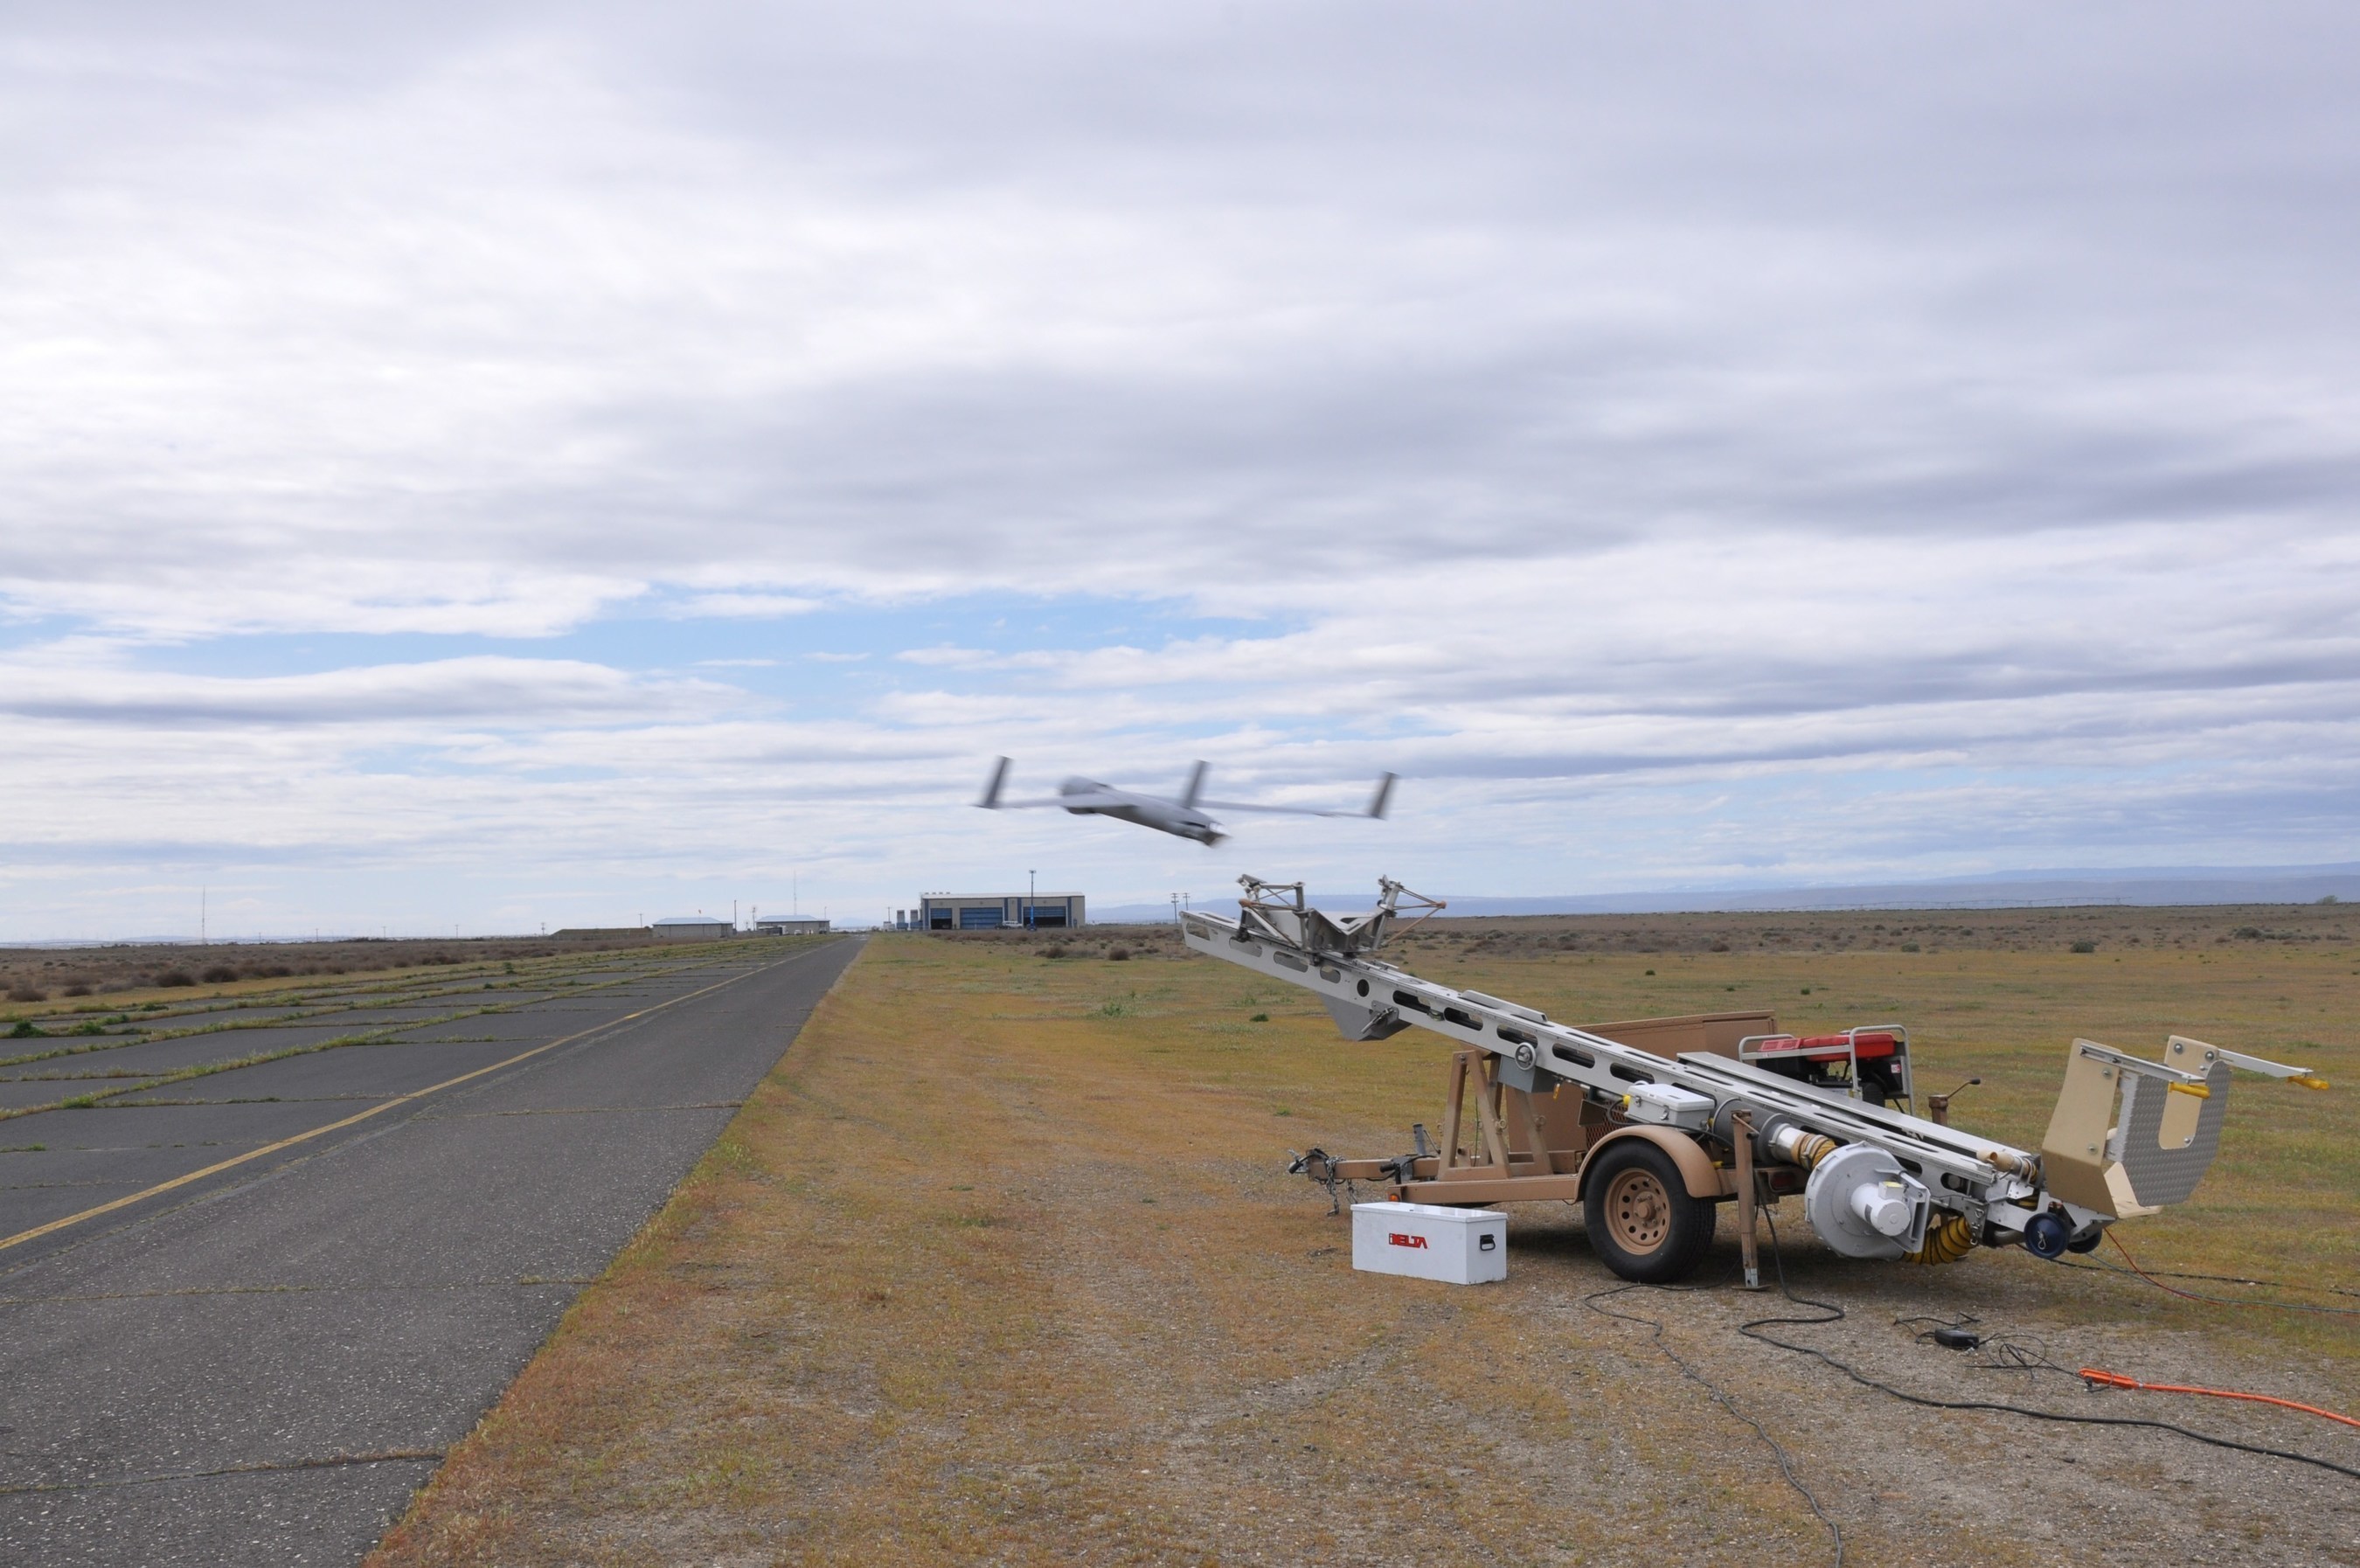 Insitu Pacific ScanEagle launched from Mark4 launcher